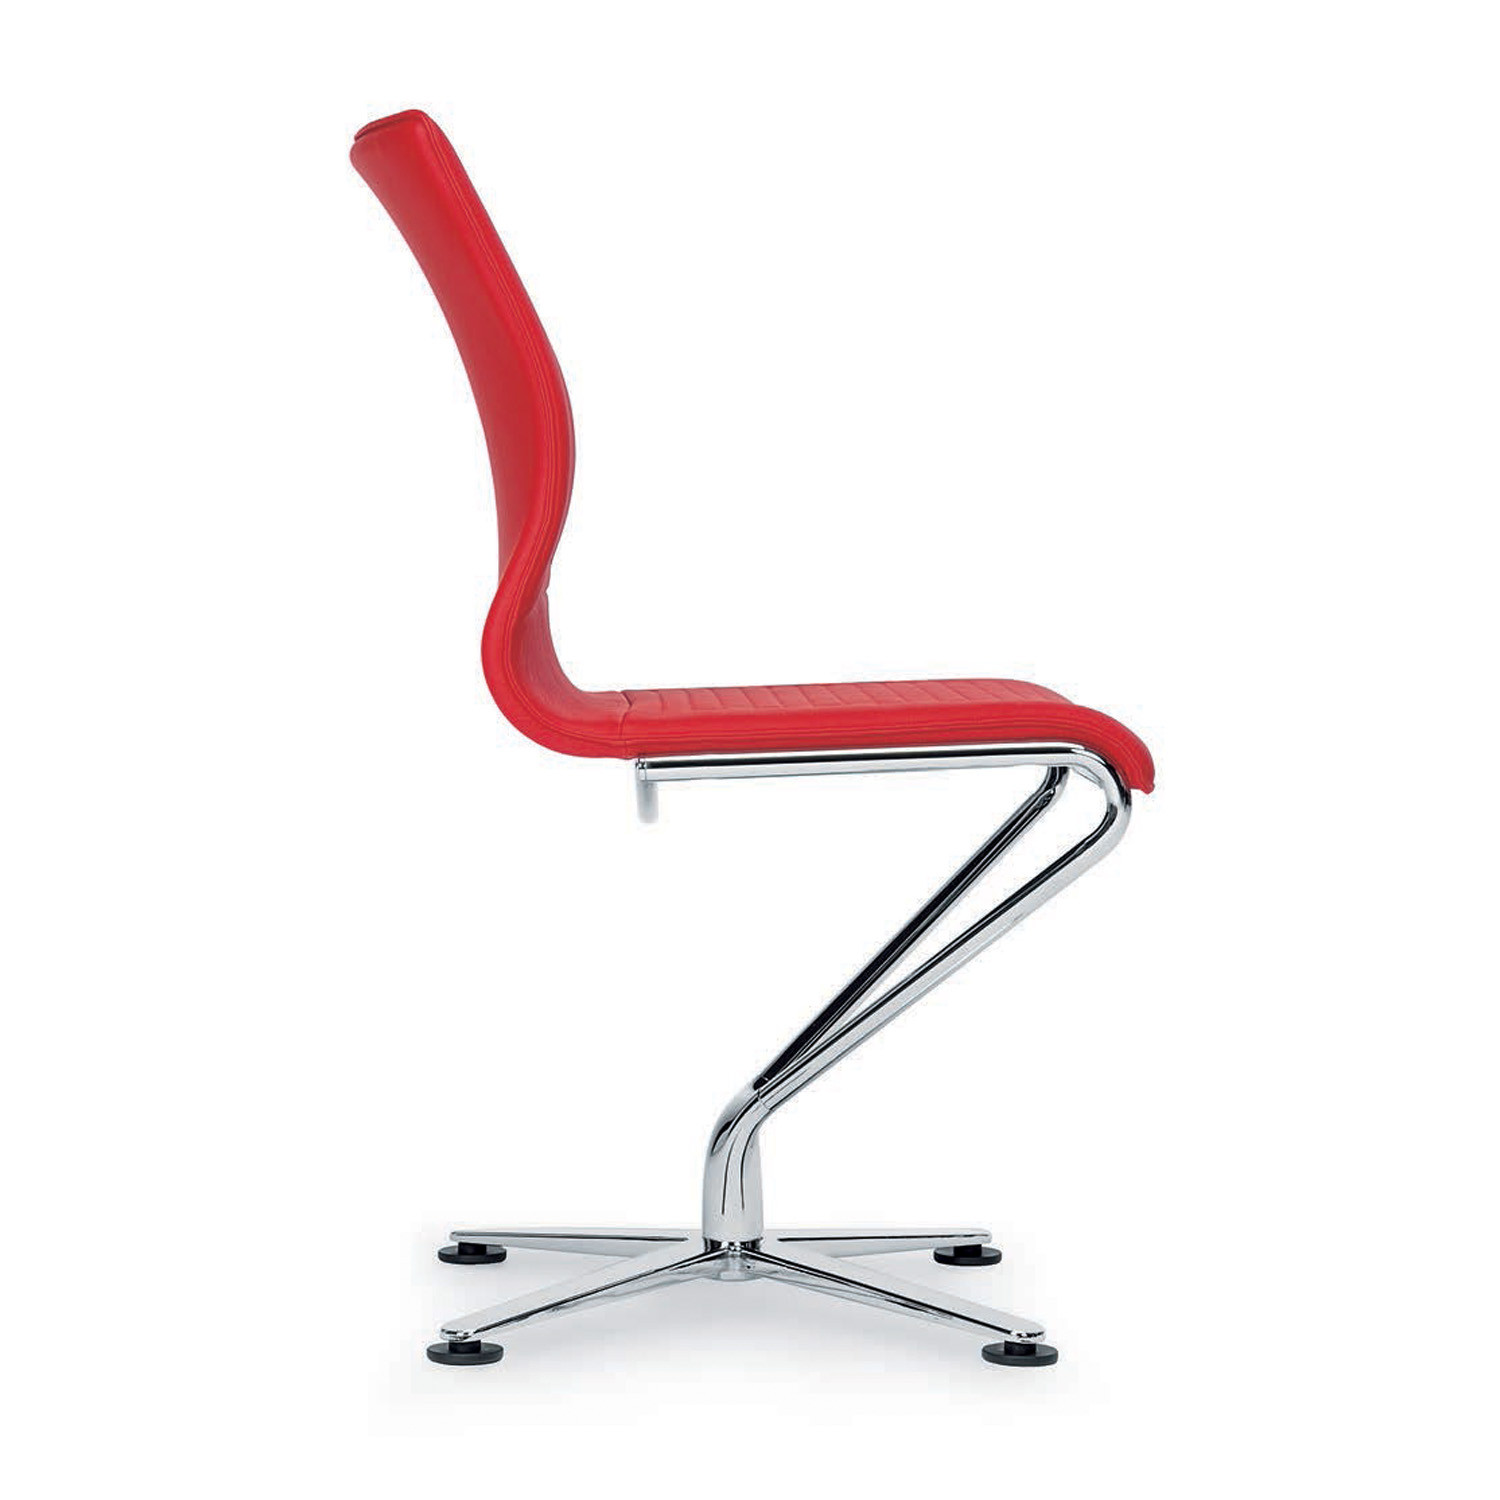 Riola Conference Chair with 4-Star Base